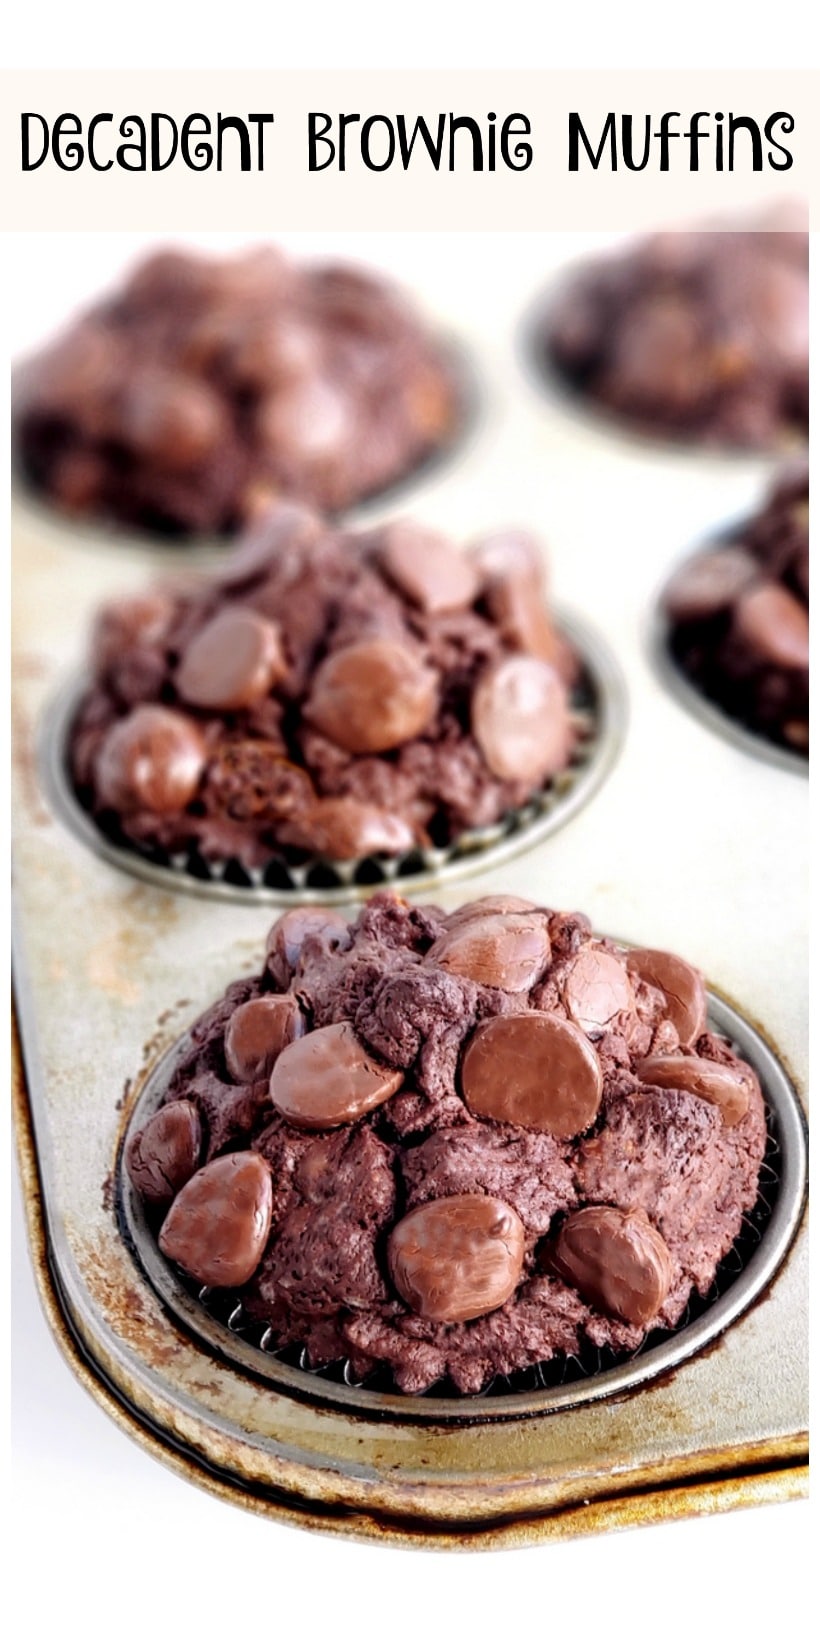 Decadent Brownie Muffins in text with muffins in a tray.